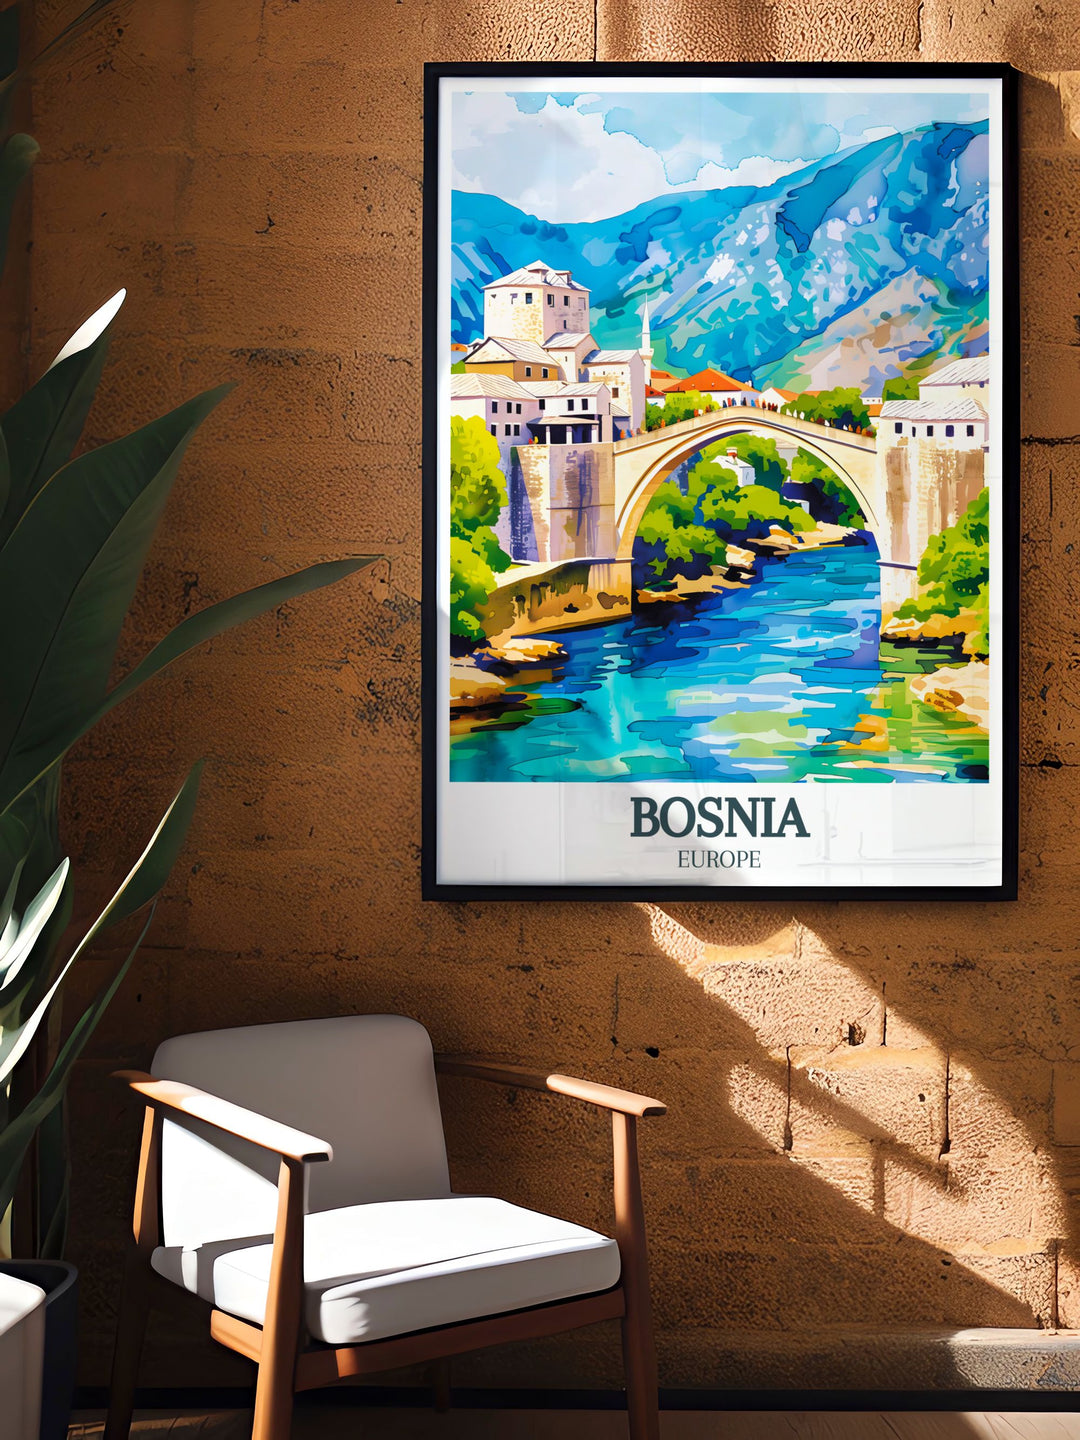 Discover the charm of Mostar with this Bosnia Wall Art featuring Stari Most bridge. This Bosnia Photo print captures the serene waters and historic architecture of Mostar, making it a perfect addition to any art collection or home decor.